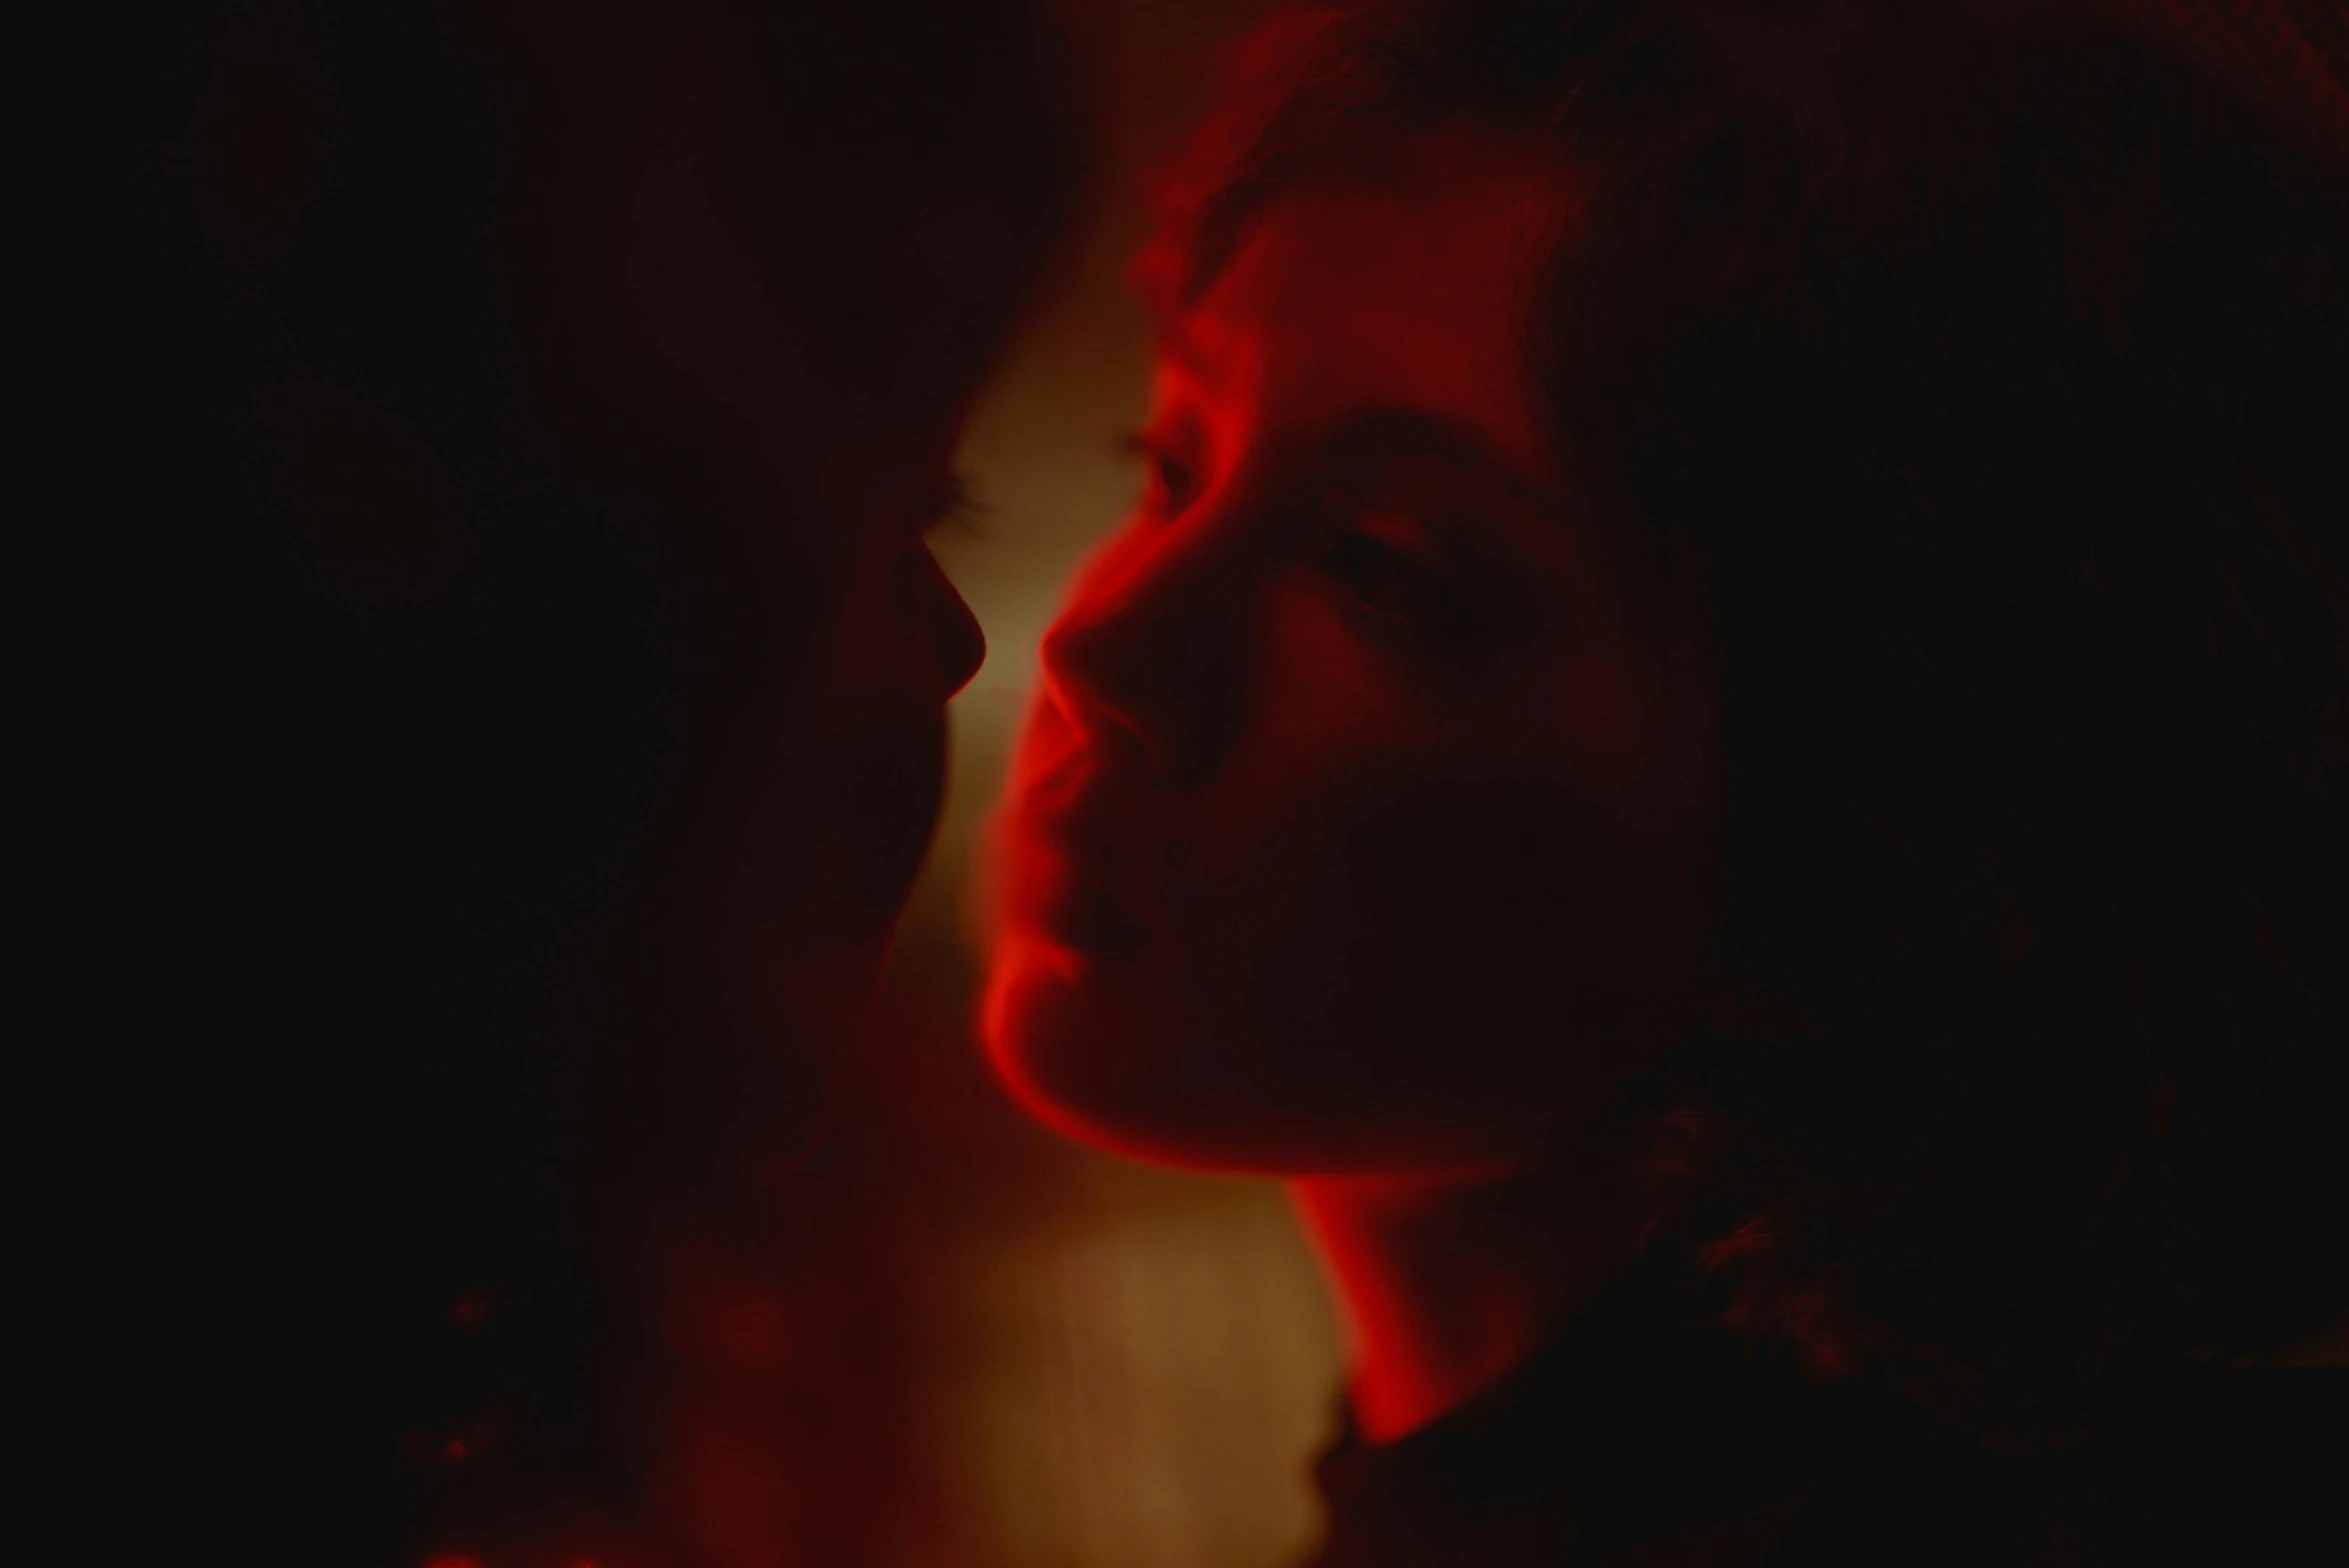 a woman standing in front of a red light, inspired by Nan Goldin, realism, reylo kissing, movie still from game of thrones, embers, two women